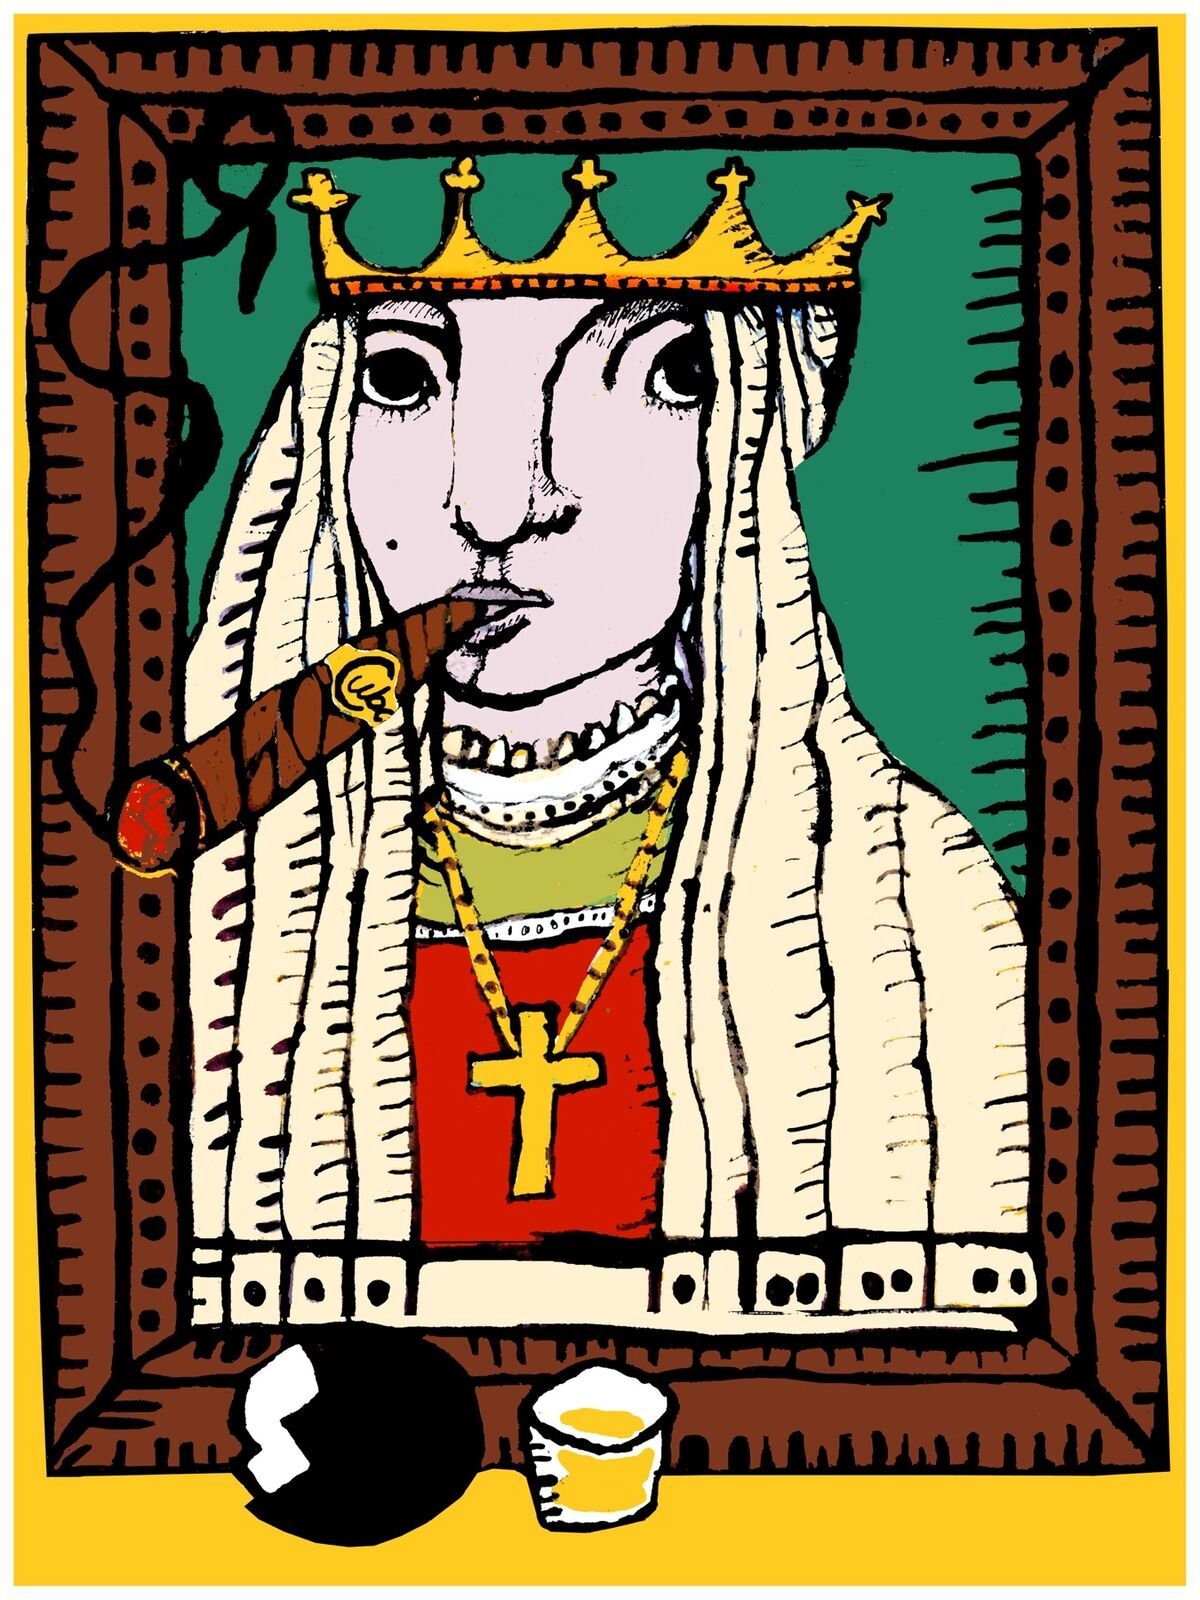 1946.Religious queen smokes cuban cigar painting vintage Poster.Decorative Art. - £12.93 GBP - £43.11 GBP